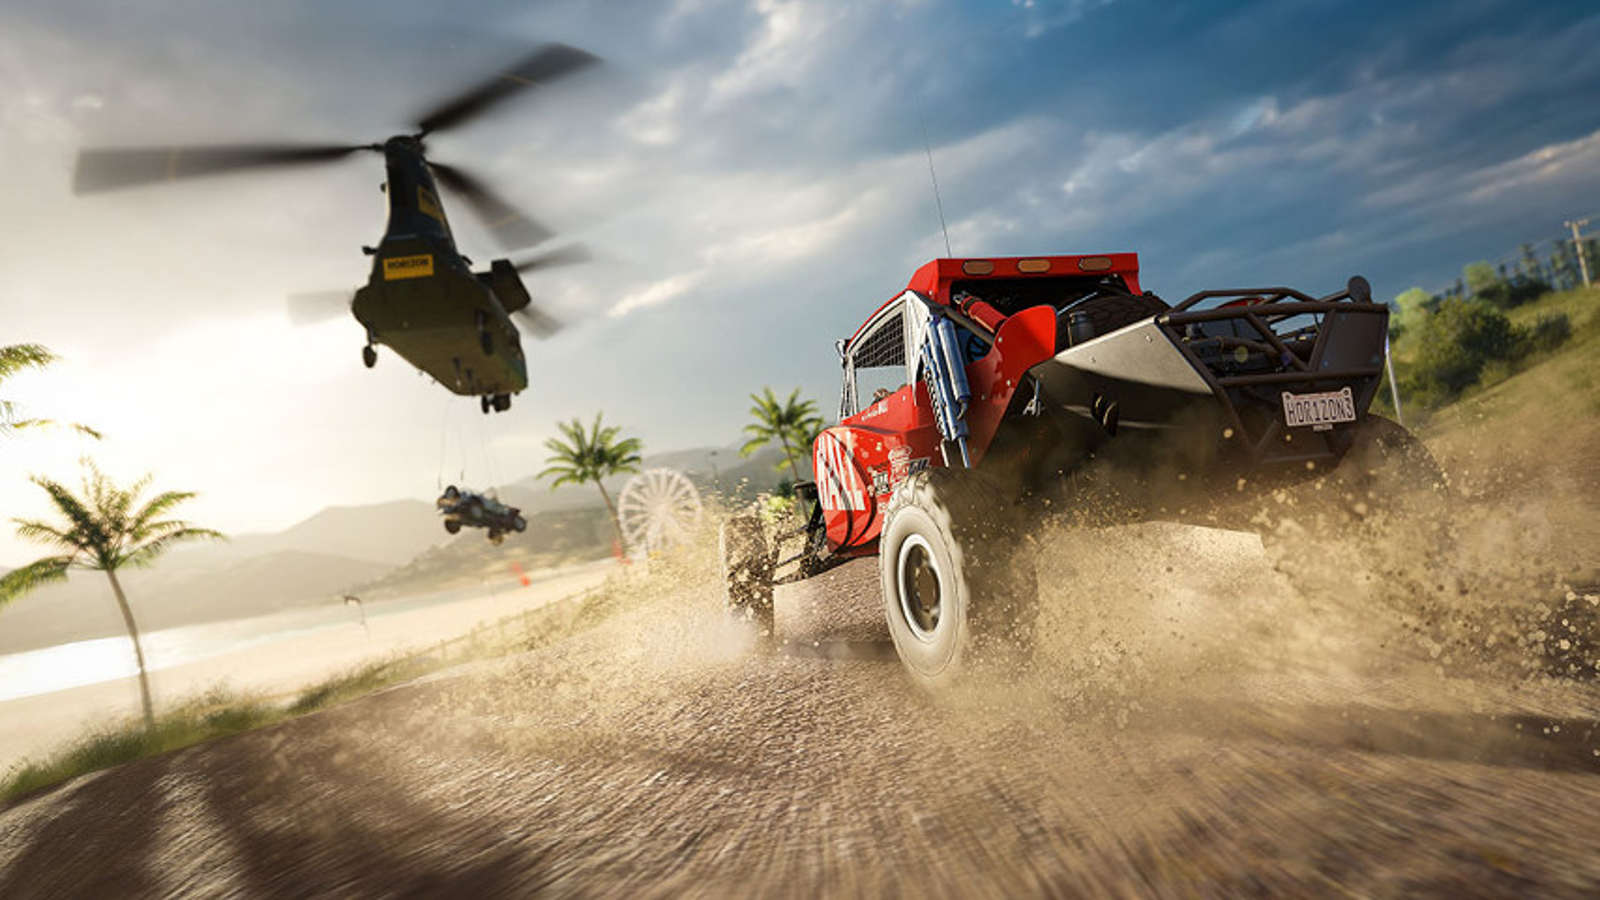 How Forza Horizon 3 became the most beautiful game on Xbox, Games